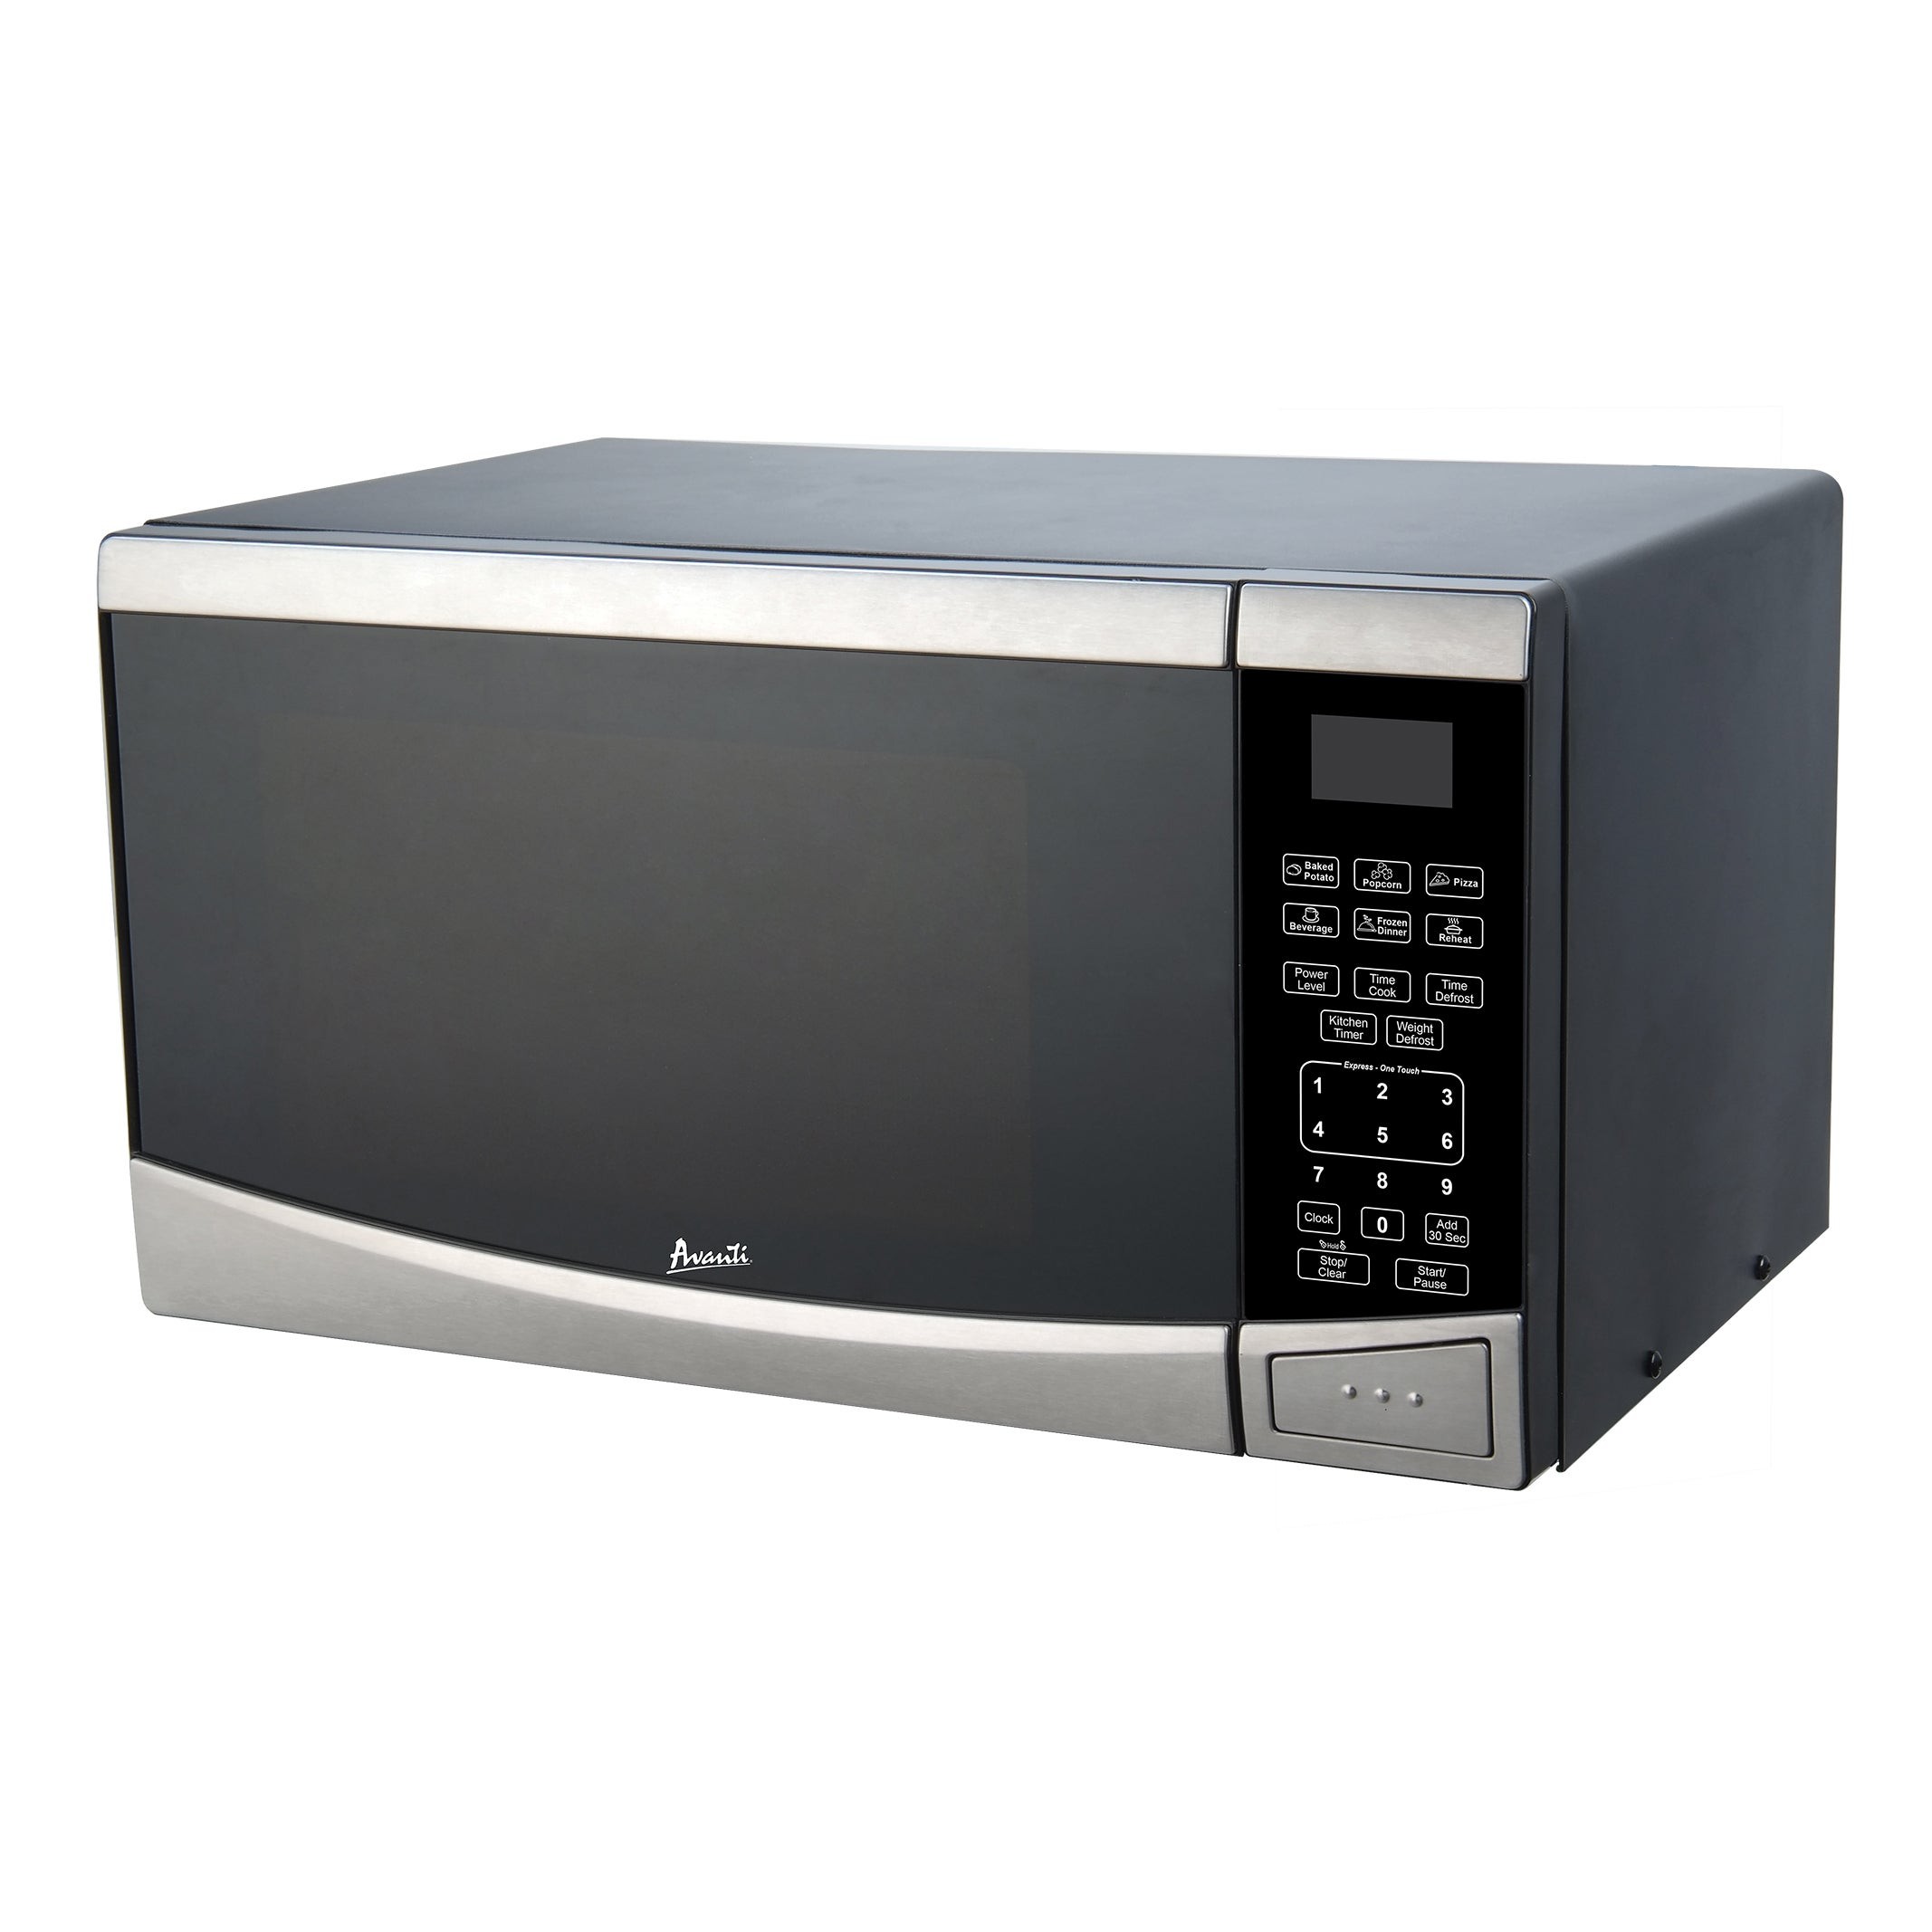 0.9 Cubic Foot 900W Microwave Oven Stainless Steel